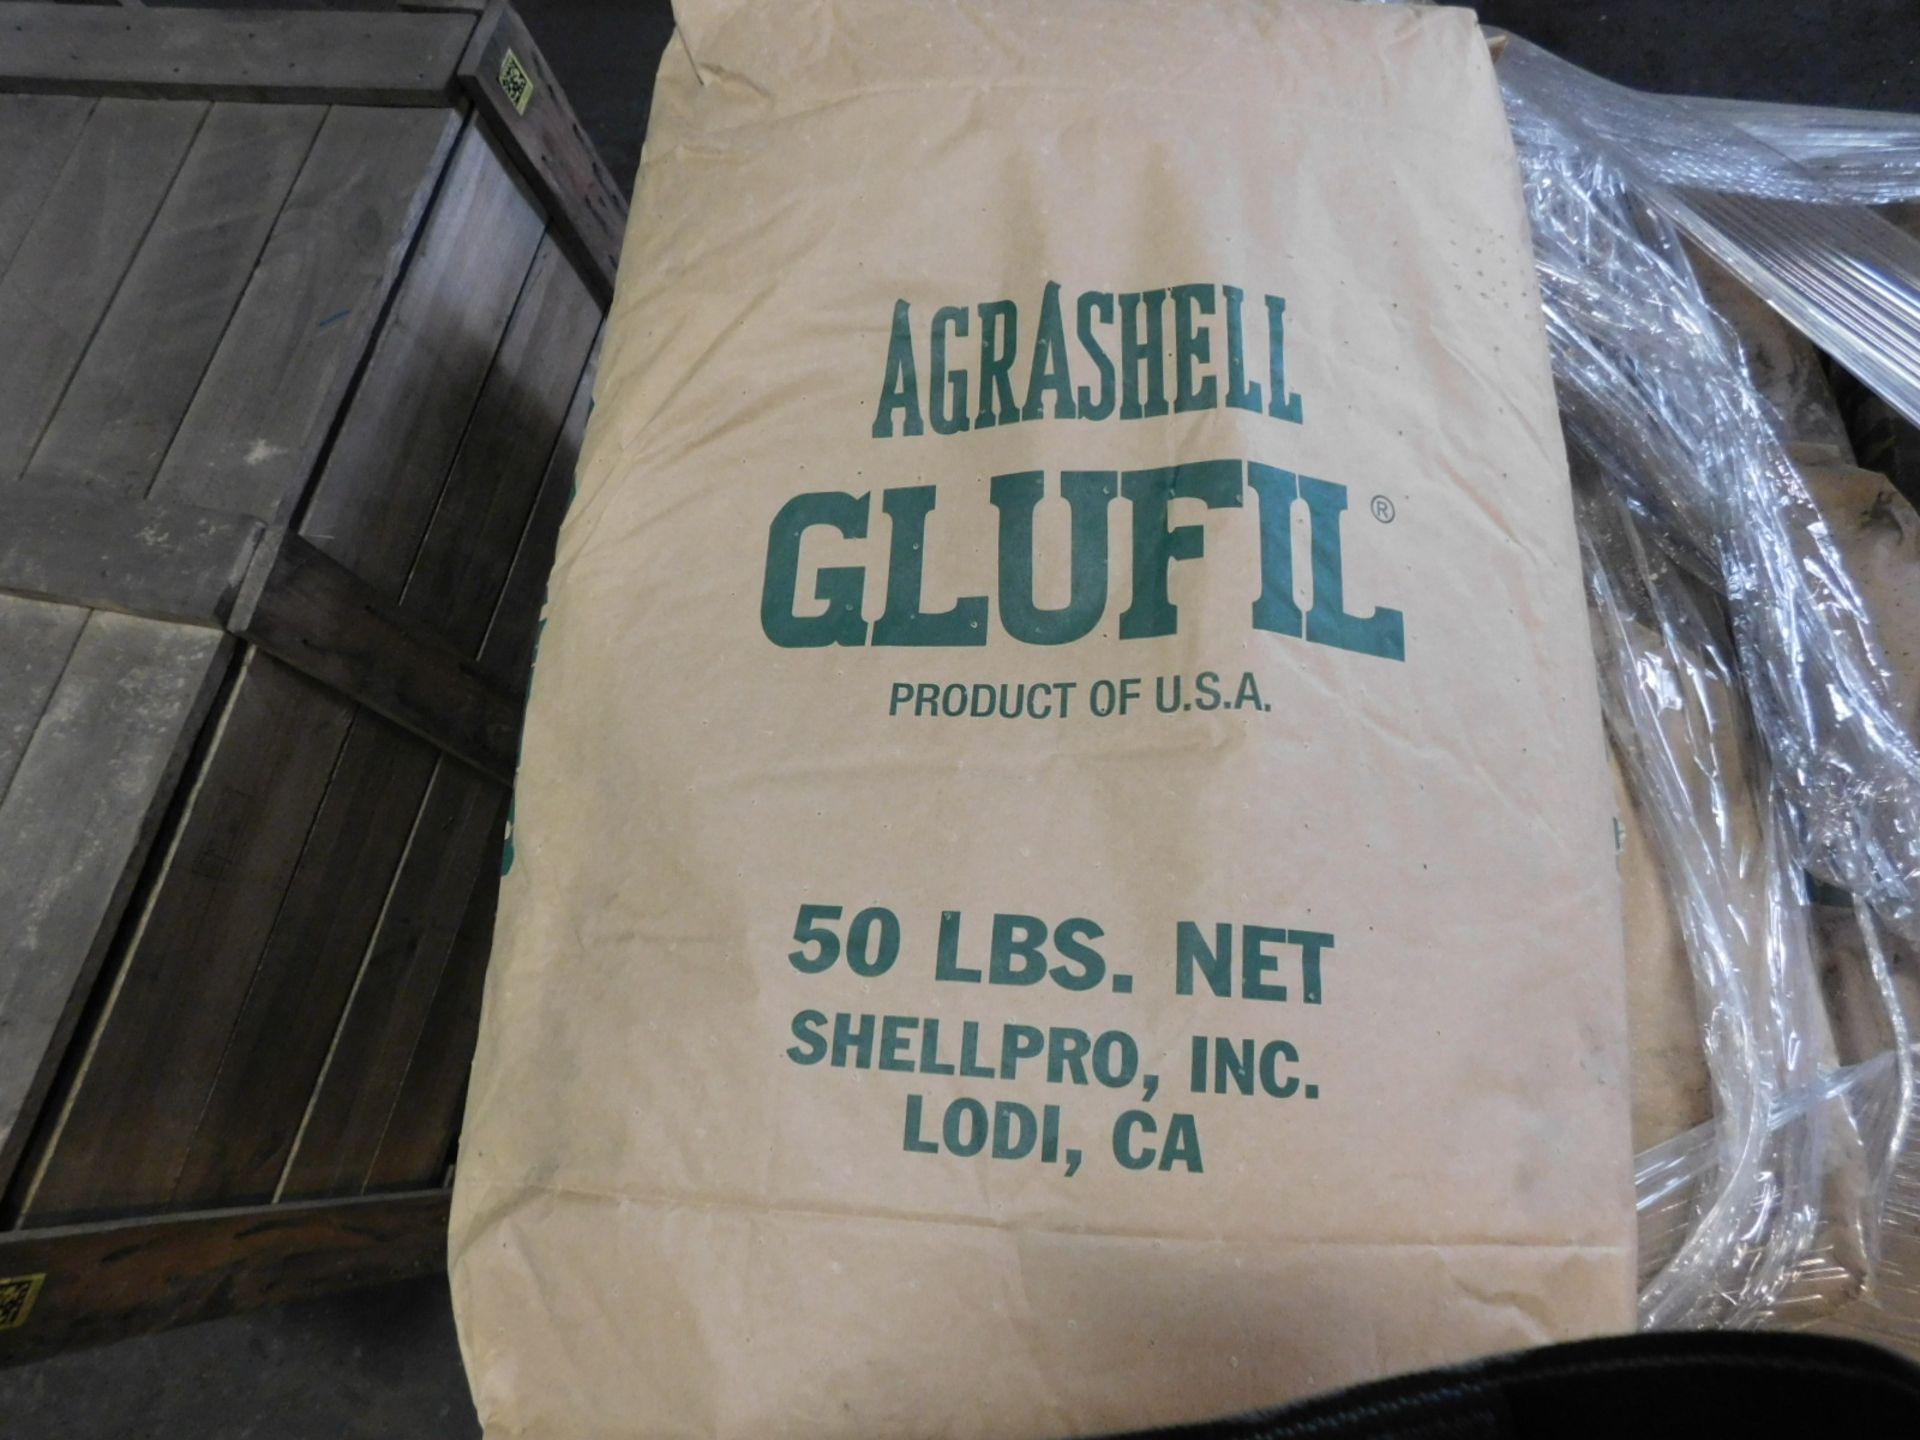 LOT - APPROX. (20) 50 LB. BAGS OF AGRASHELL GLUFIL, ON PALLET